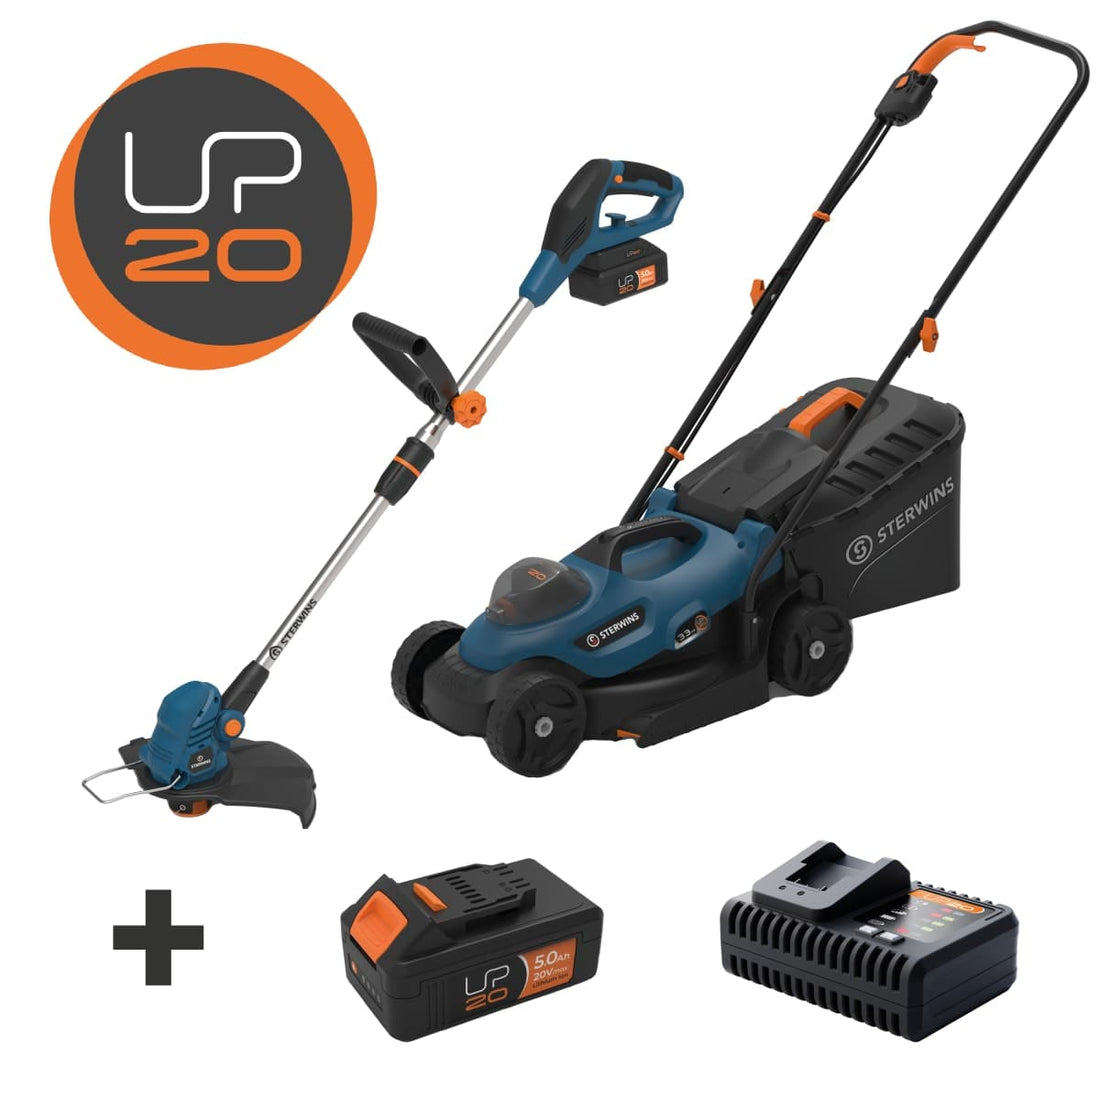 STERWINS 33CM CORDLESS LAWN MOWER KIT COMPLETE WITH BATTERY AND CHARGER - best price from Maltashopper.com BR500015572